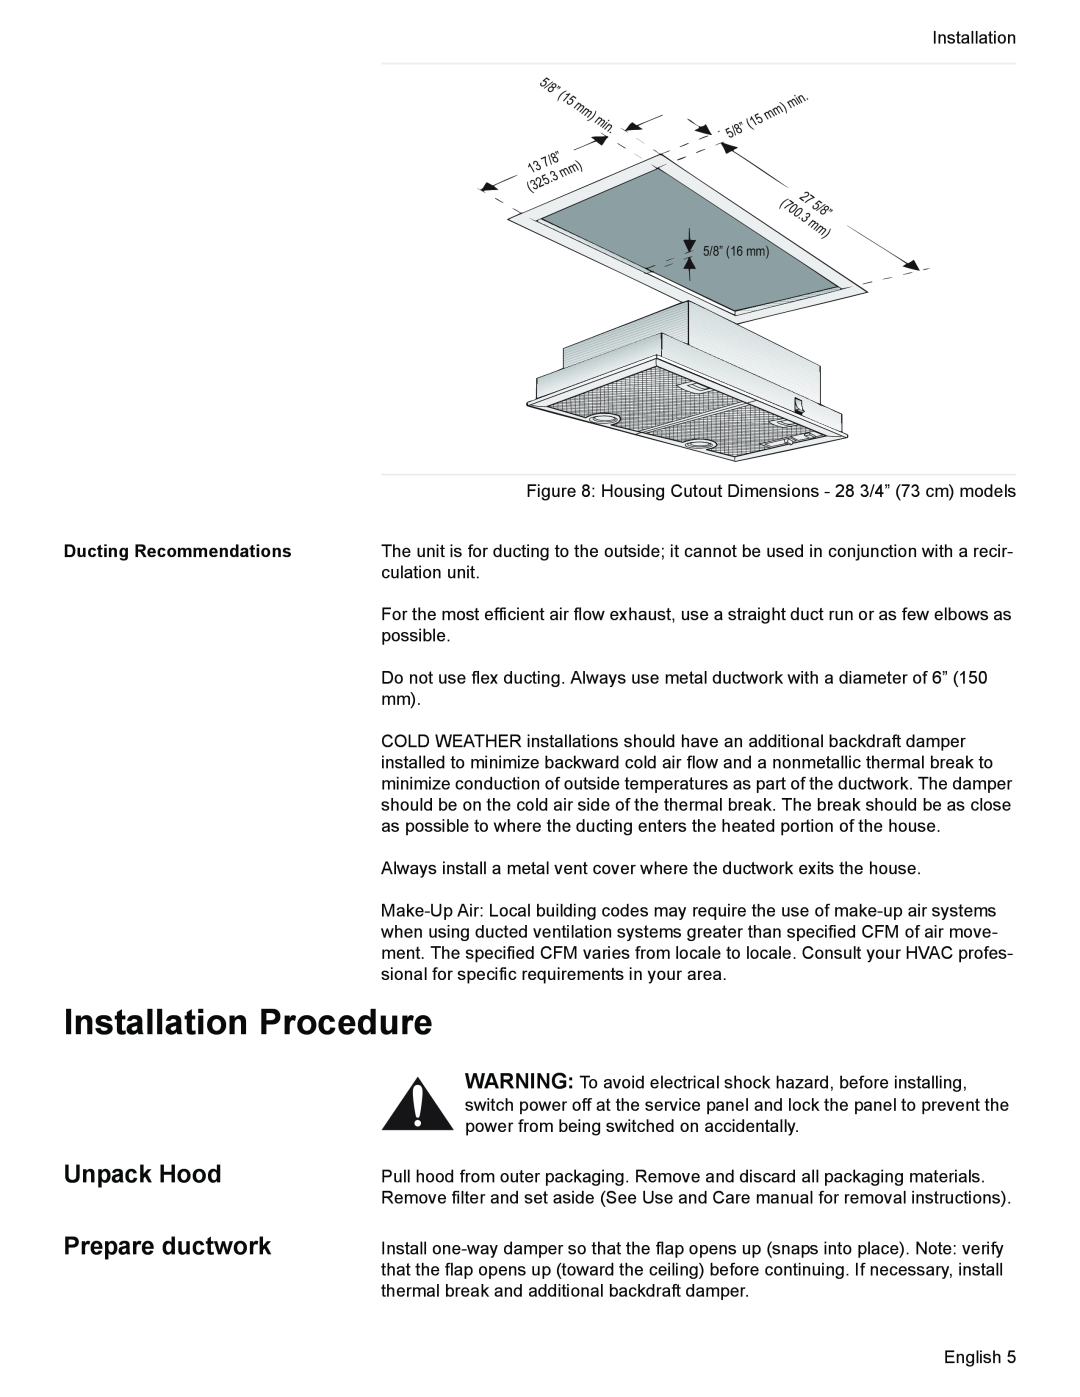 Thermador VCI2 installation manual Installation Procedure, Unpack Hood, Prepare ductwork, Ducting Recommendations 